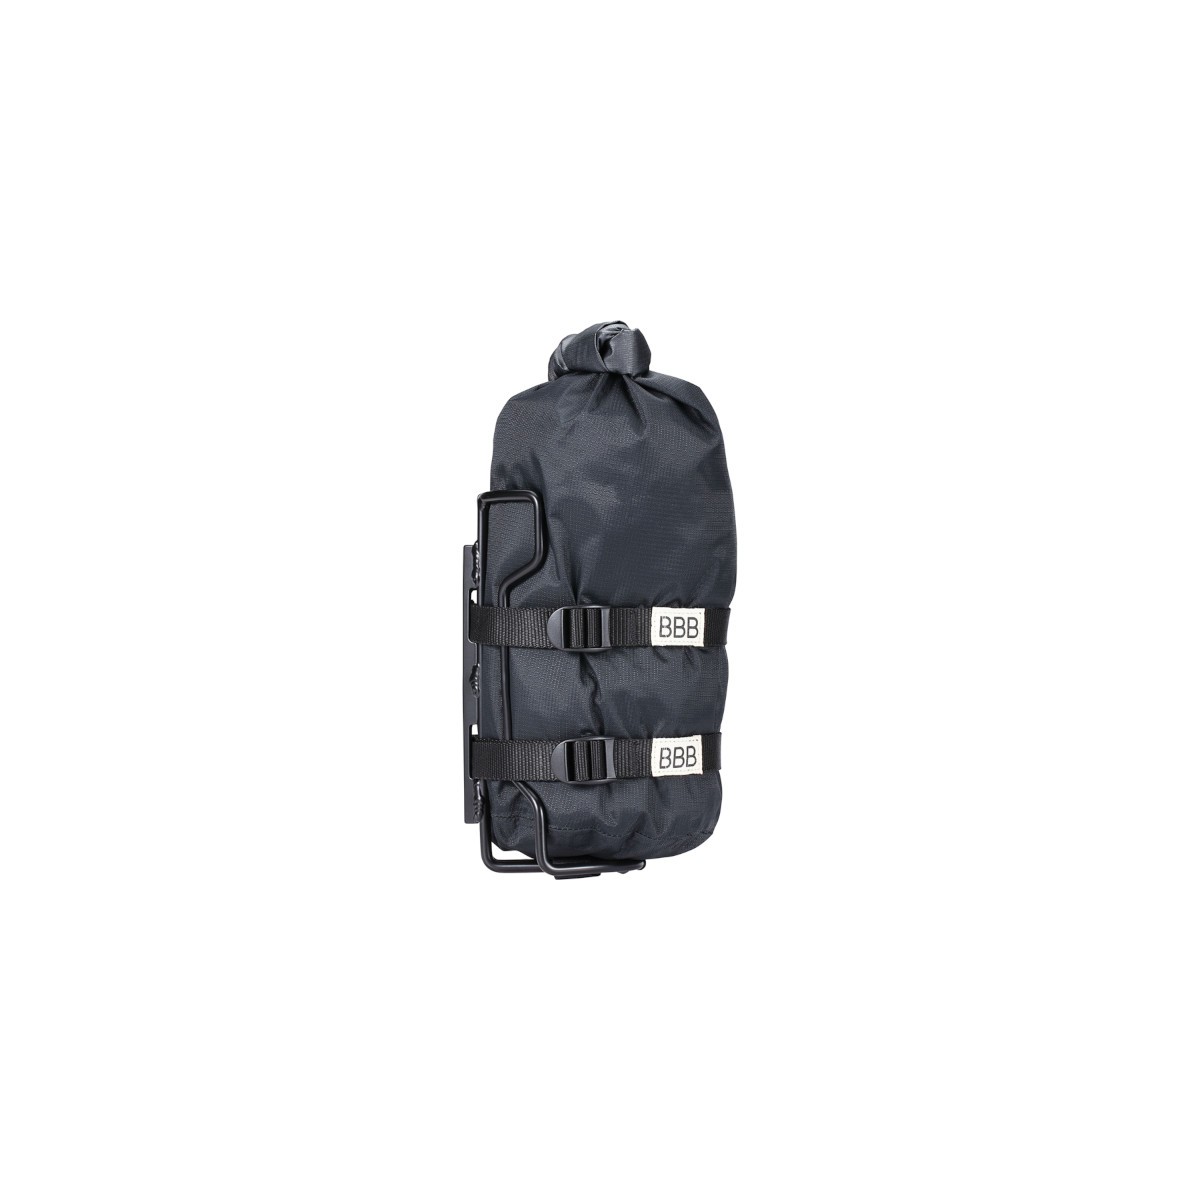 Bike packing Stack Pack with holder